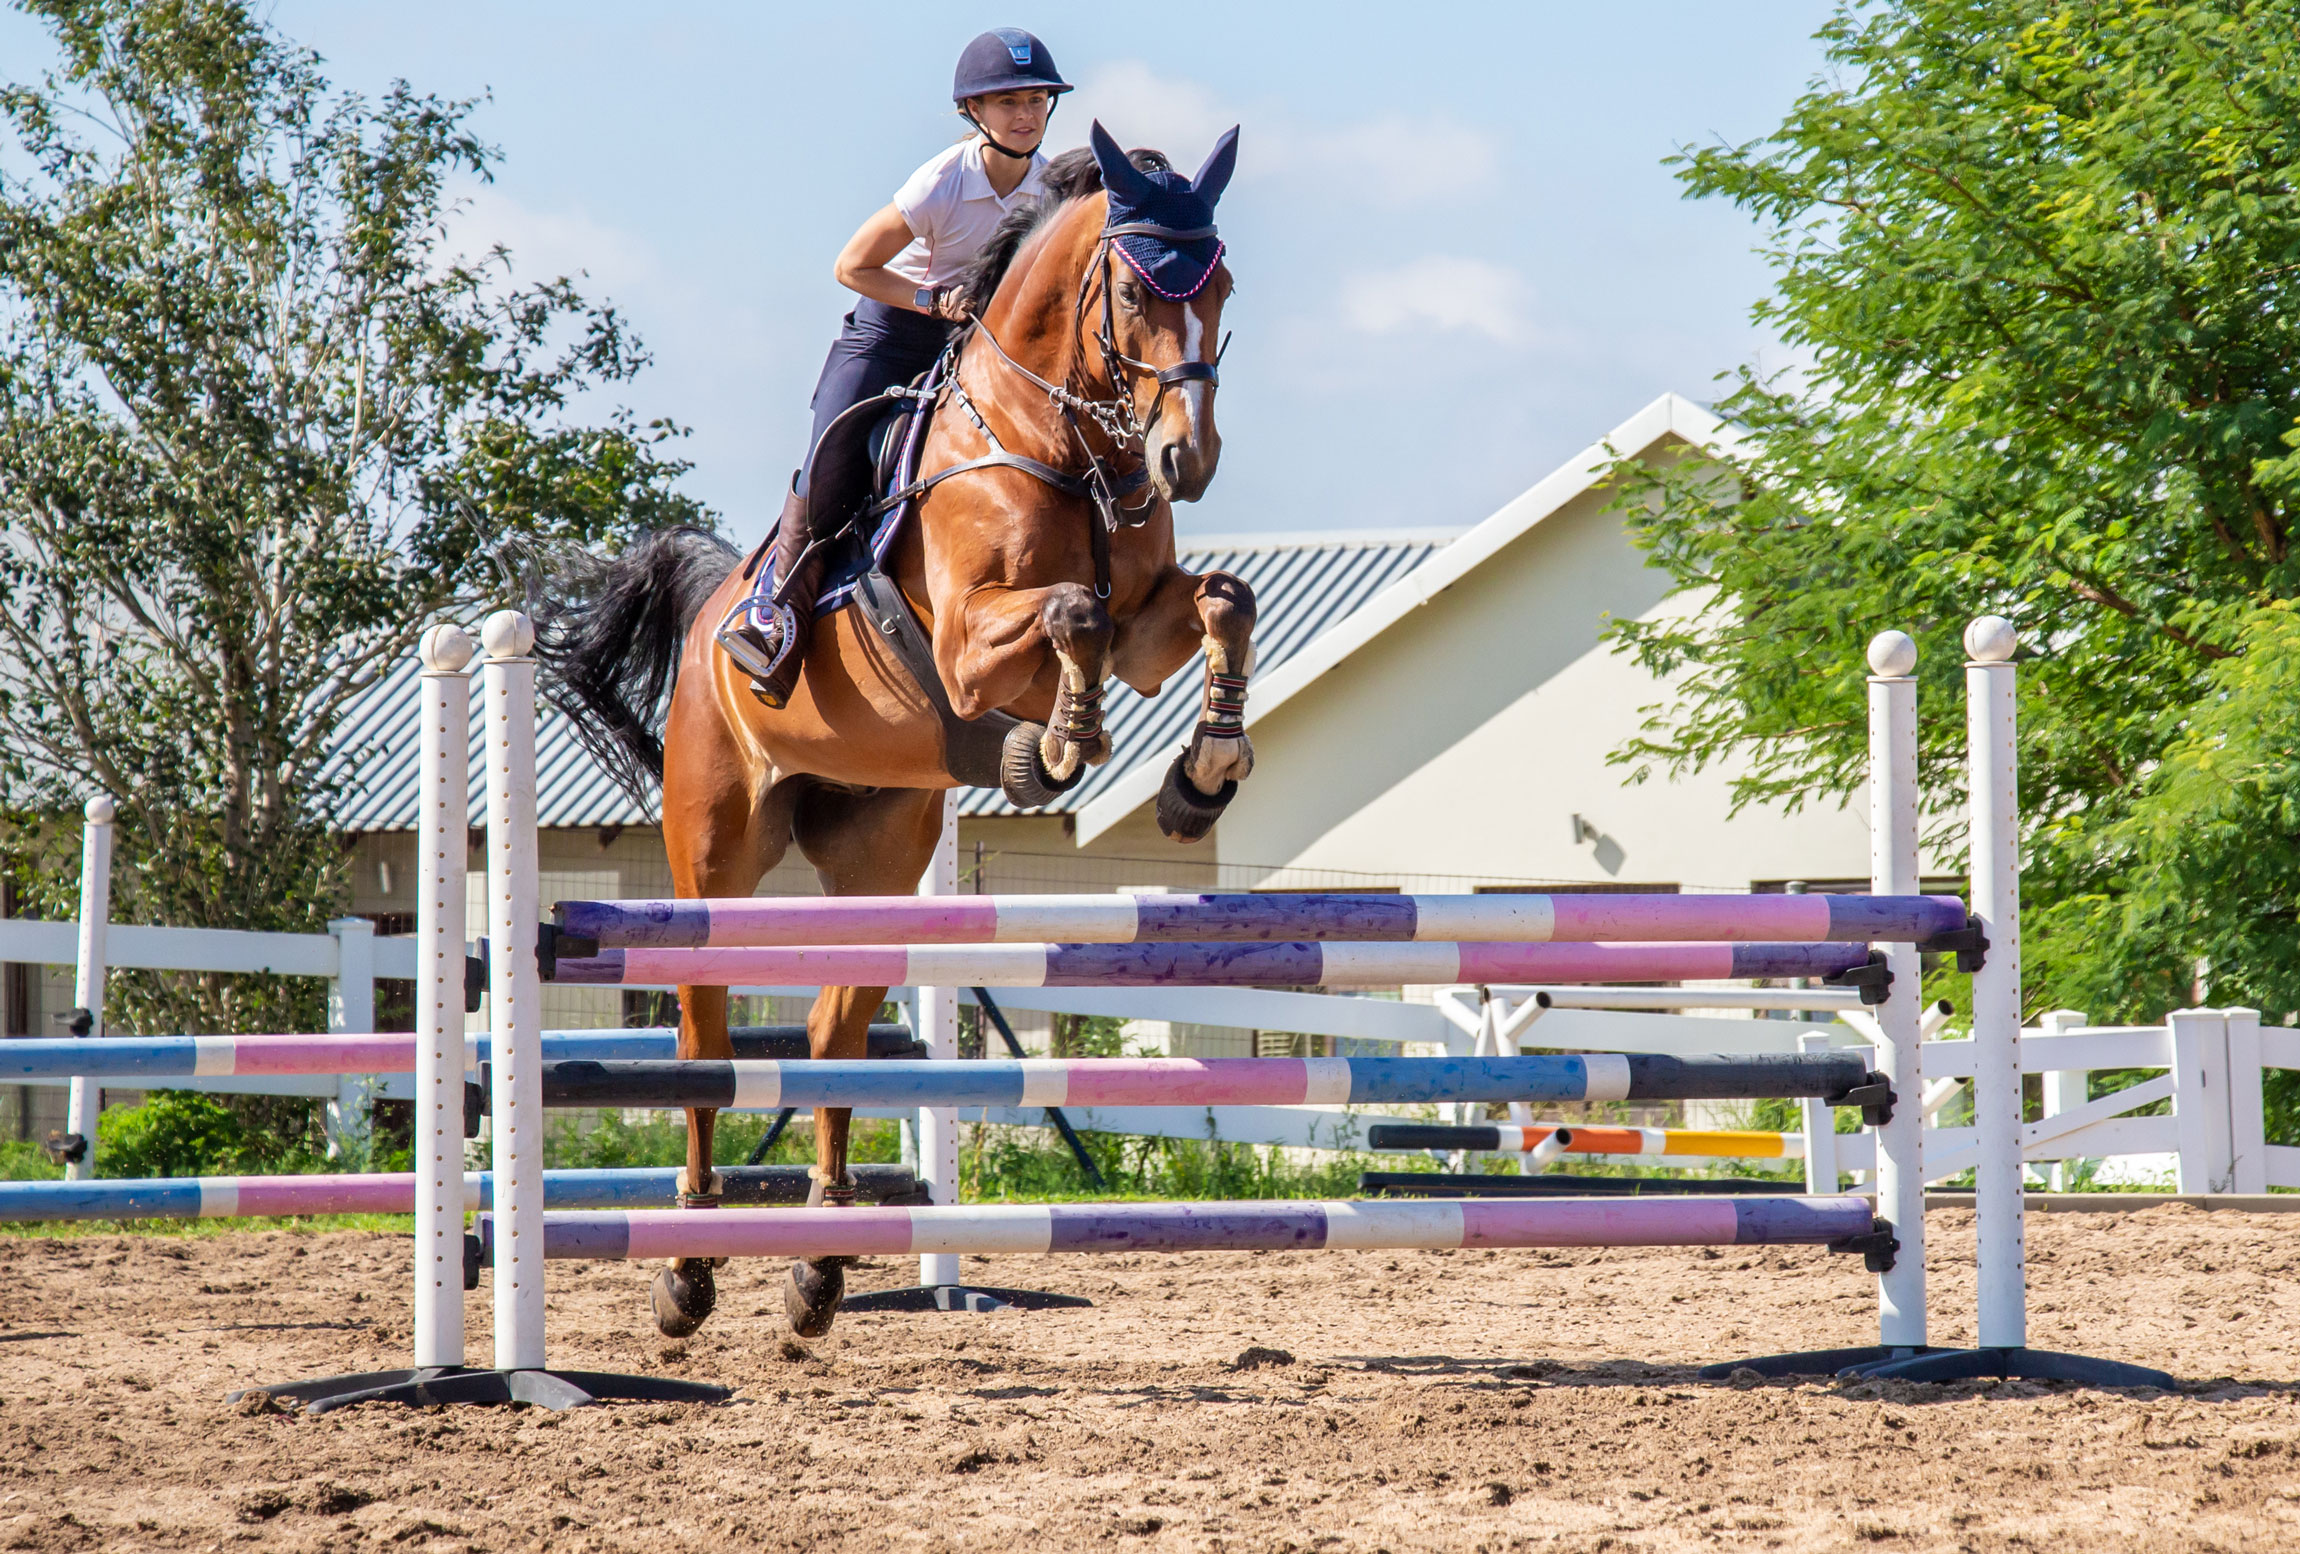 The Importance Of Plastic Horse Jumps In Developing Rider And Horse Skills